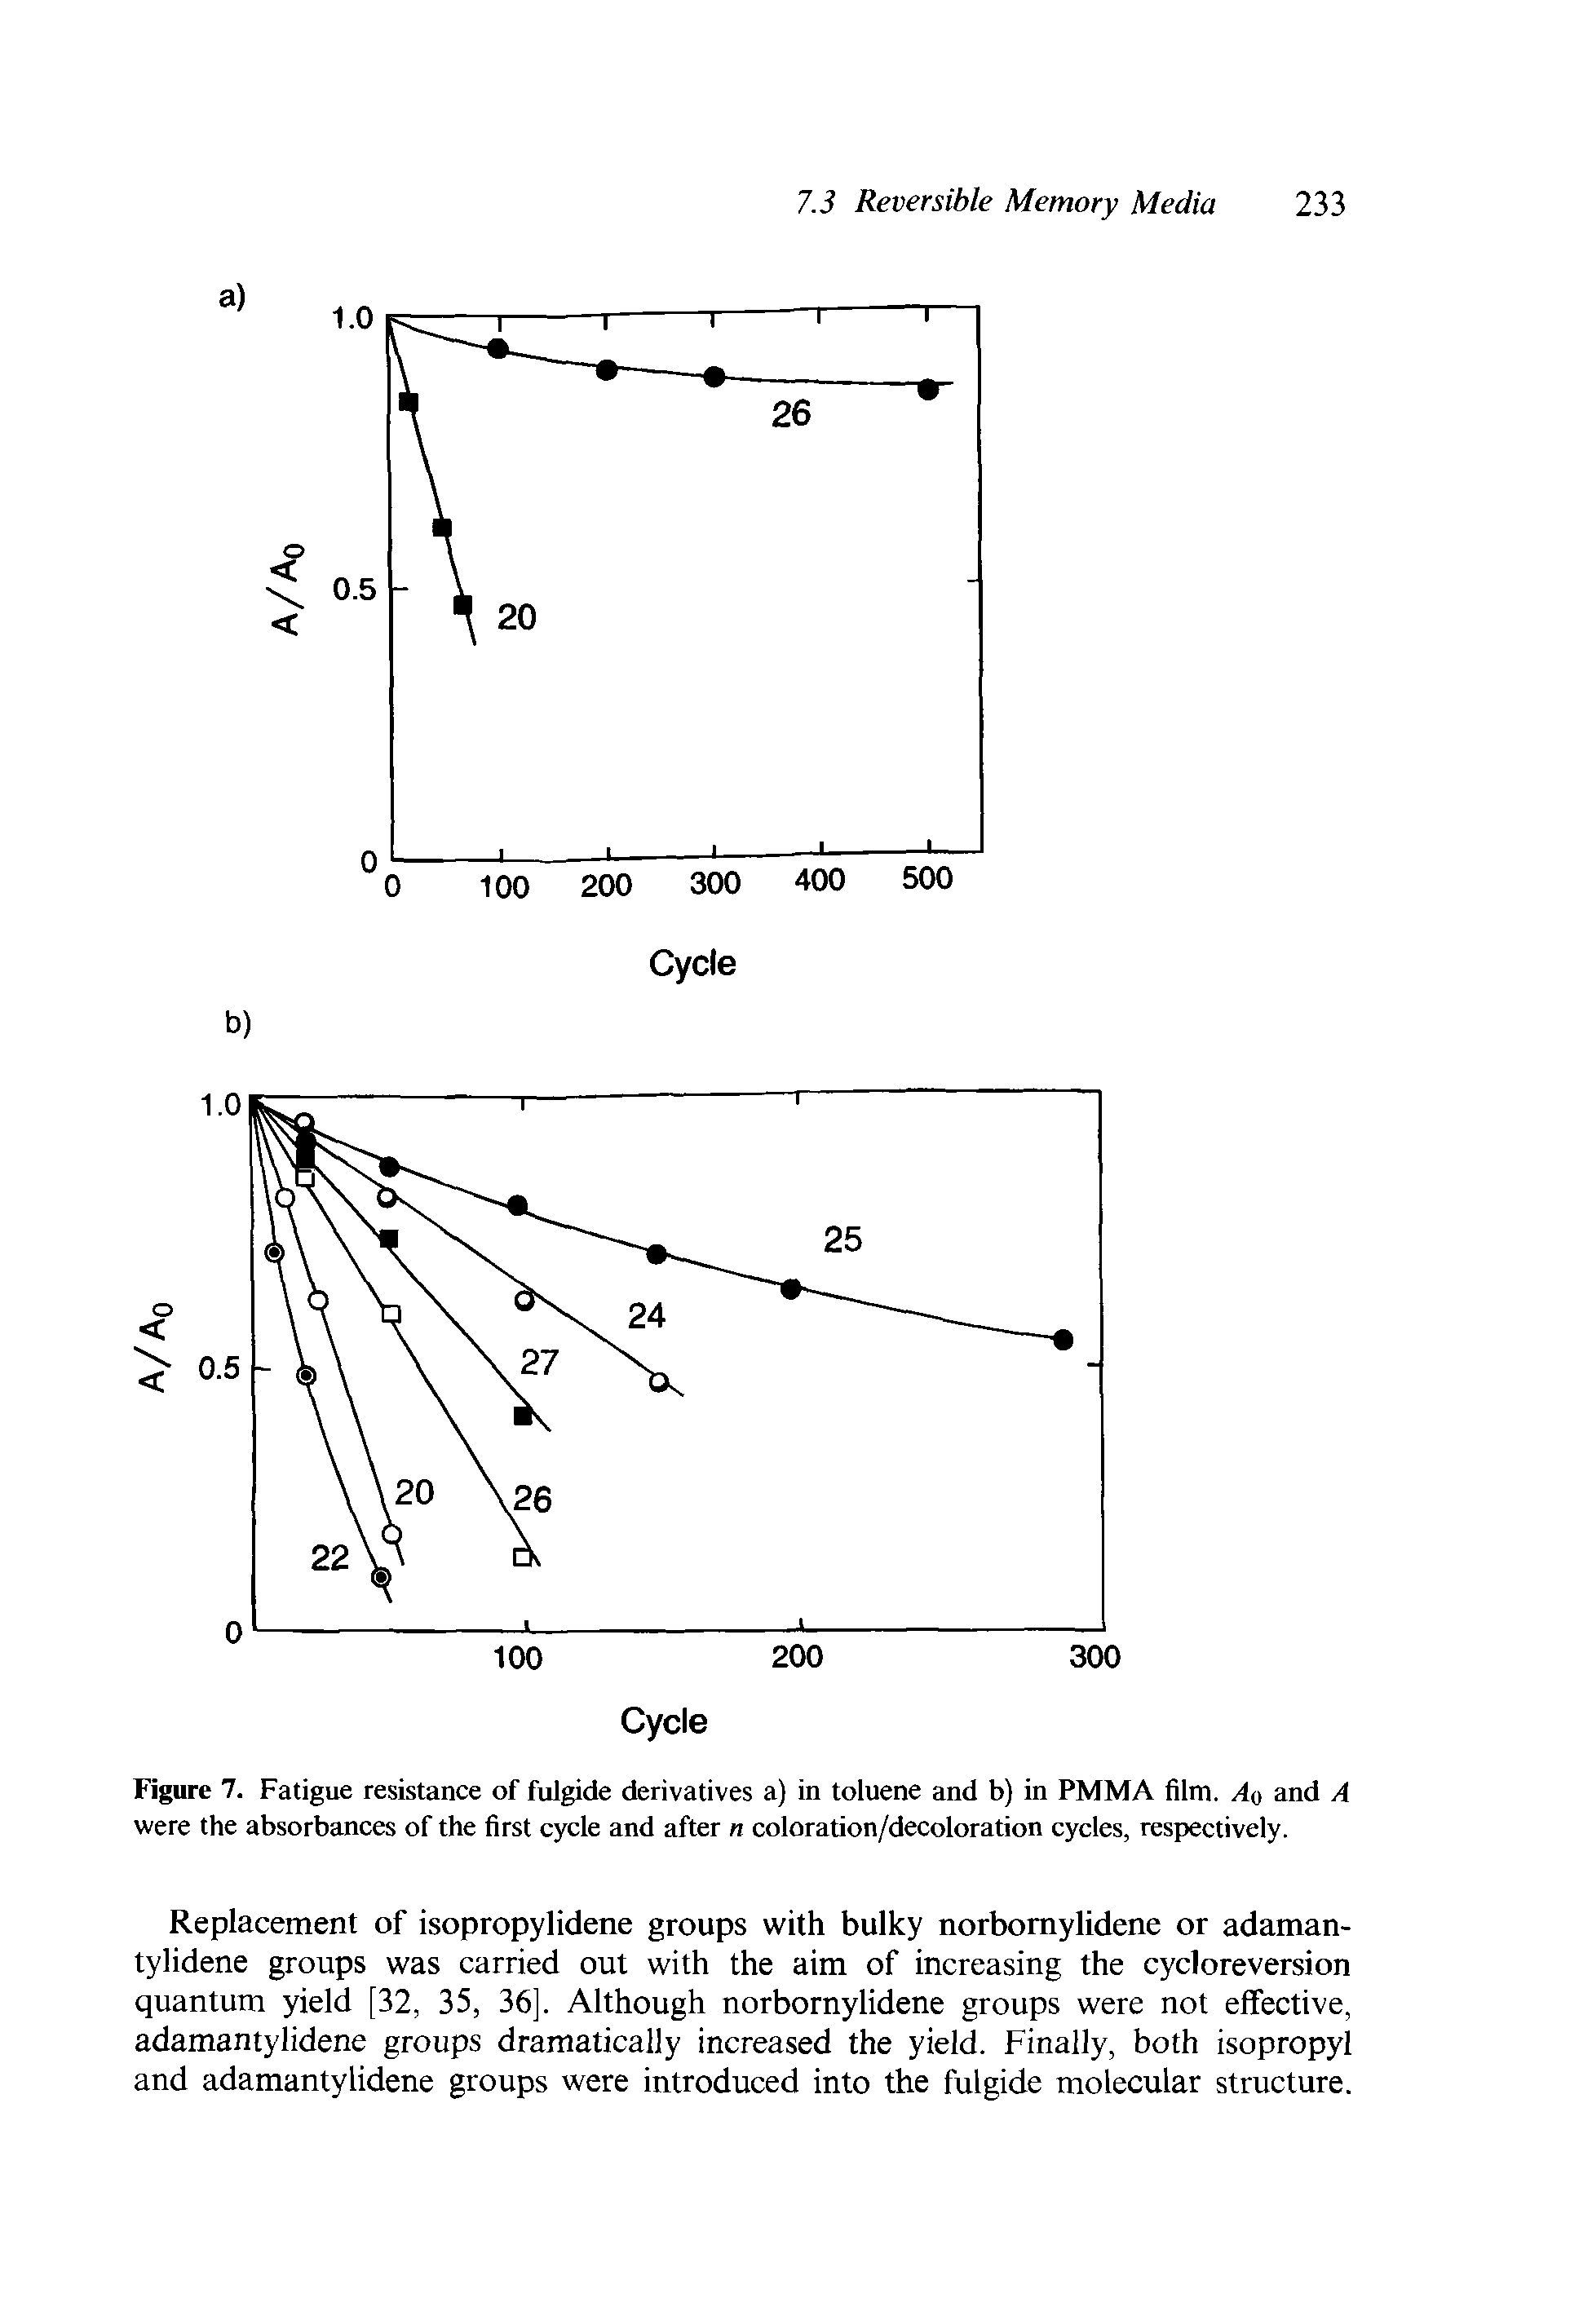 Figure 7. Fatigue resistance of fulgide derivatives a) in toluene and b) in PMMA film. Aq and A were the absorbances of the first cycle and after n coloration/decoloration cycles, respectively.